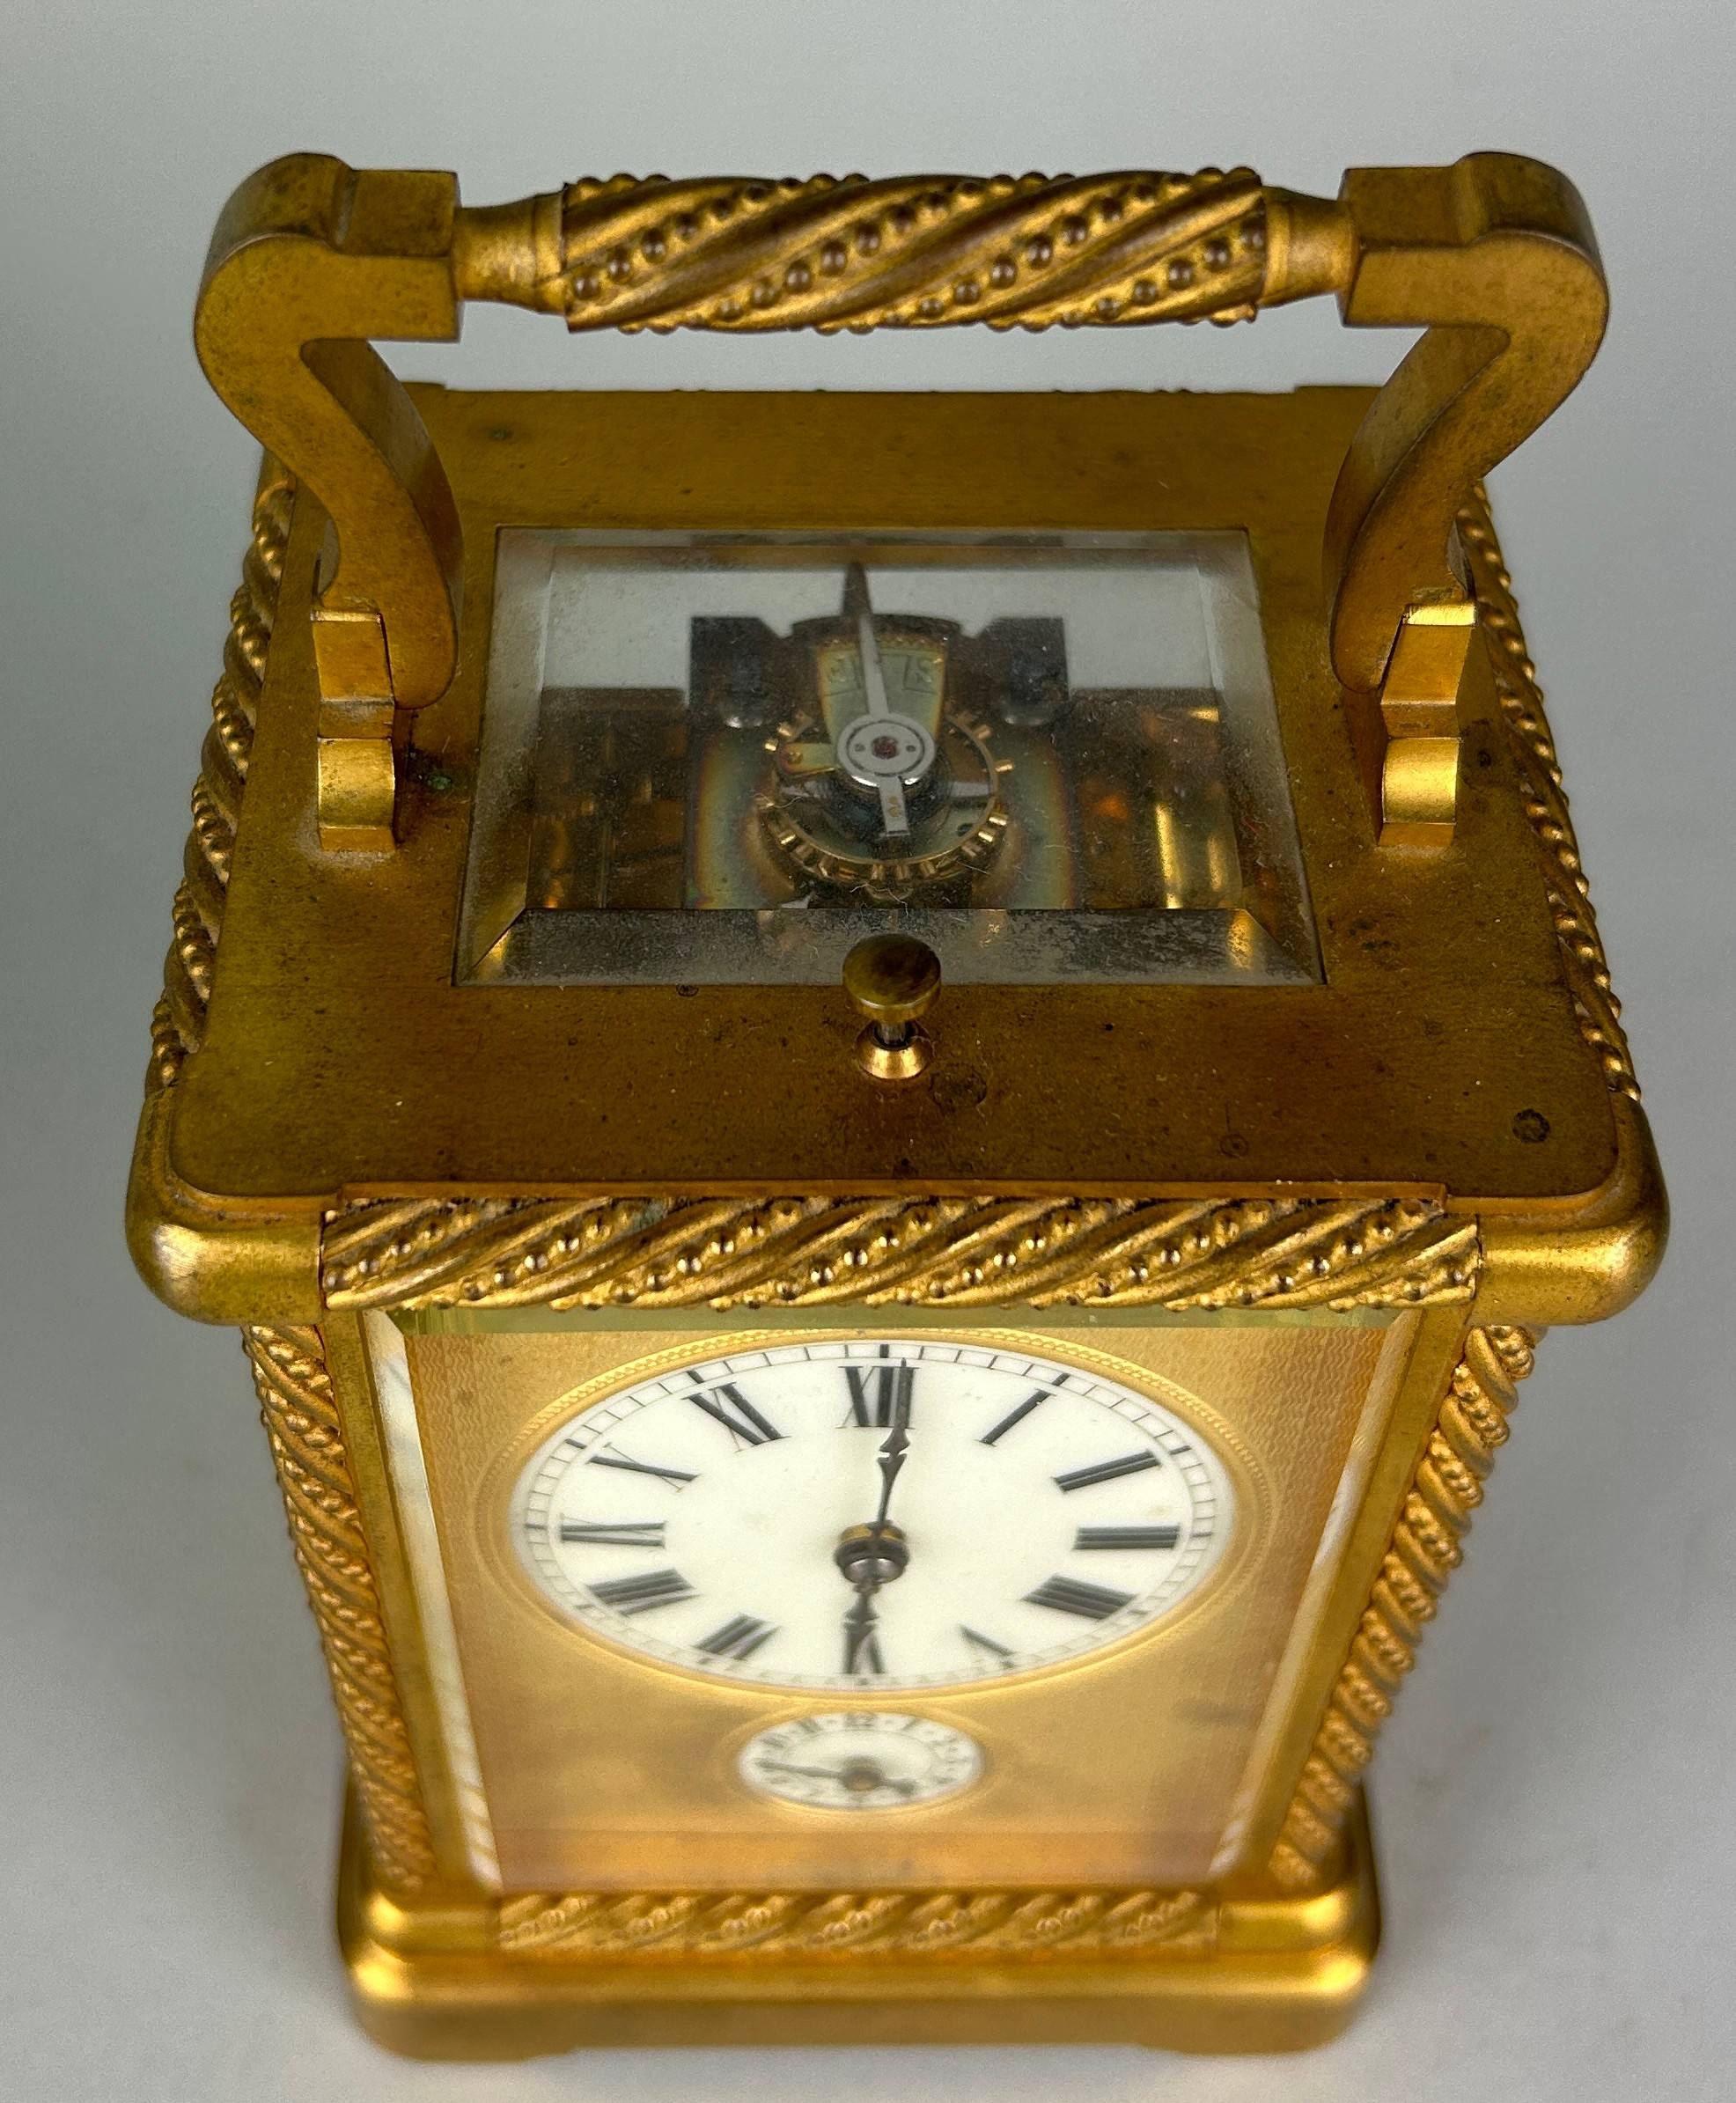 A GOOD CASED 19TH CENTURY FRENCH GILT BRONZE REPEATER CARRIAGE CLOCK WITH ALARM In working order. - Image 6 of 7